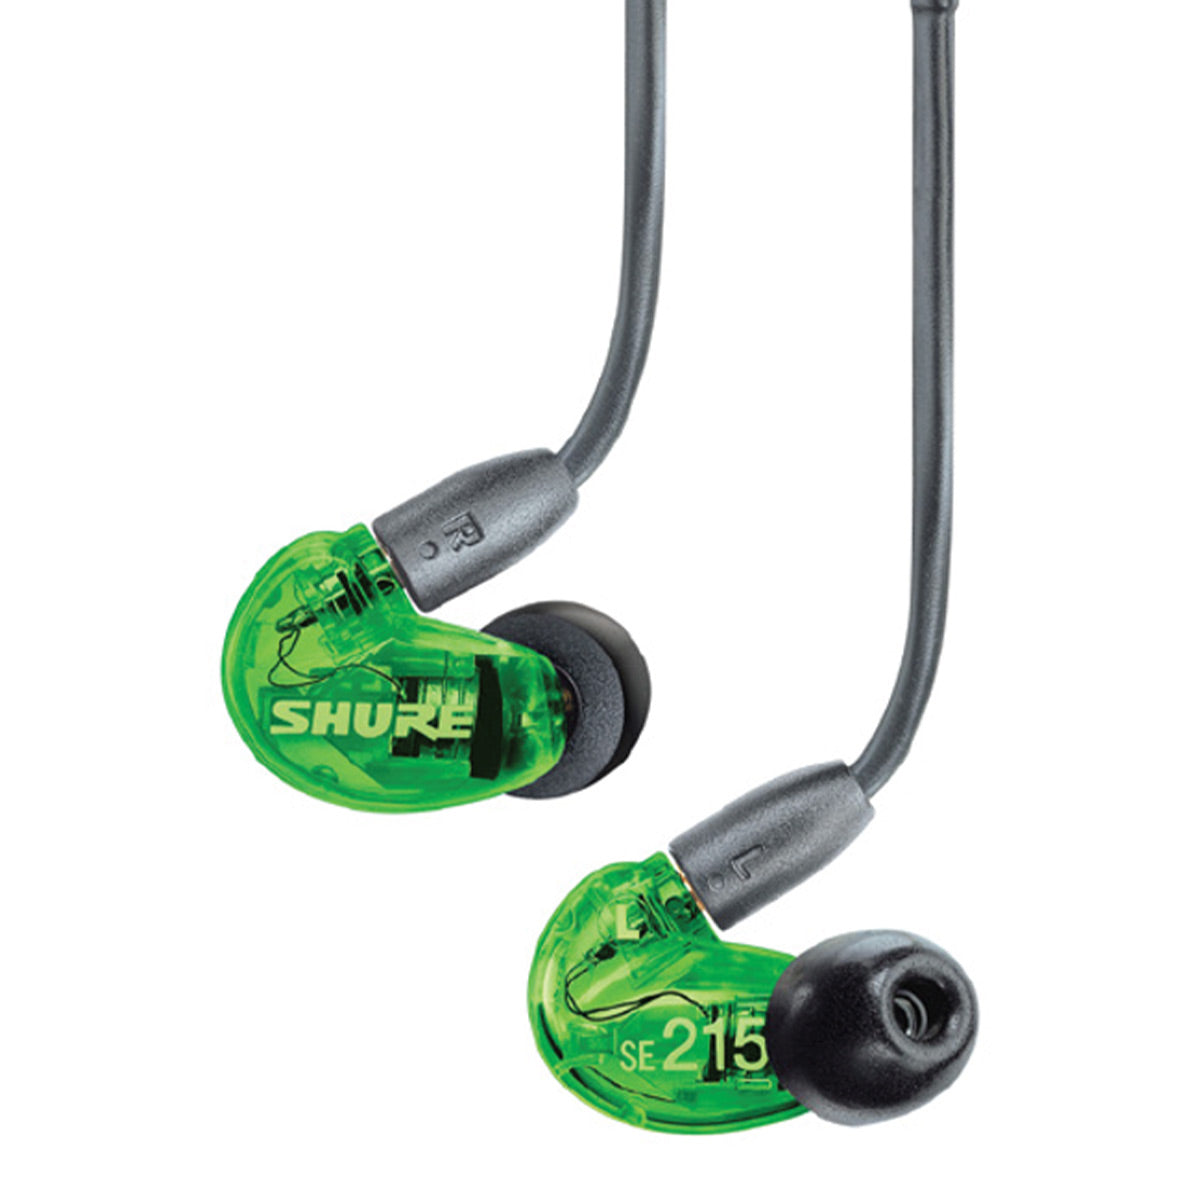 Shure SE215 Professional Sound Isolating Earphones (Limited Edition Green)